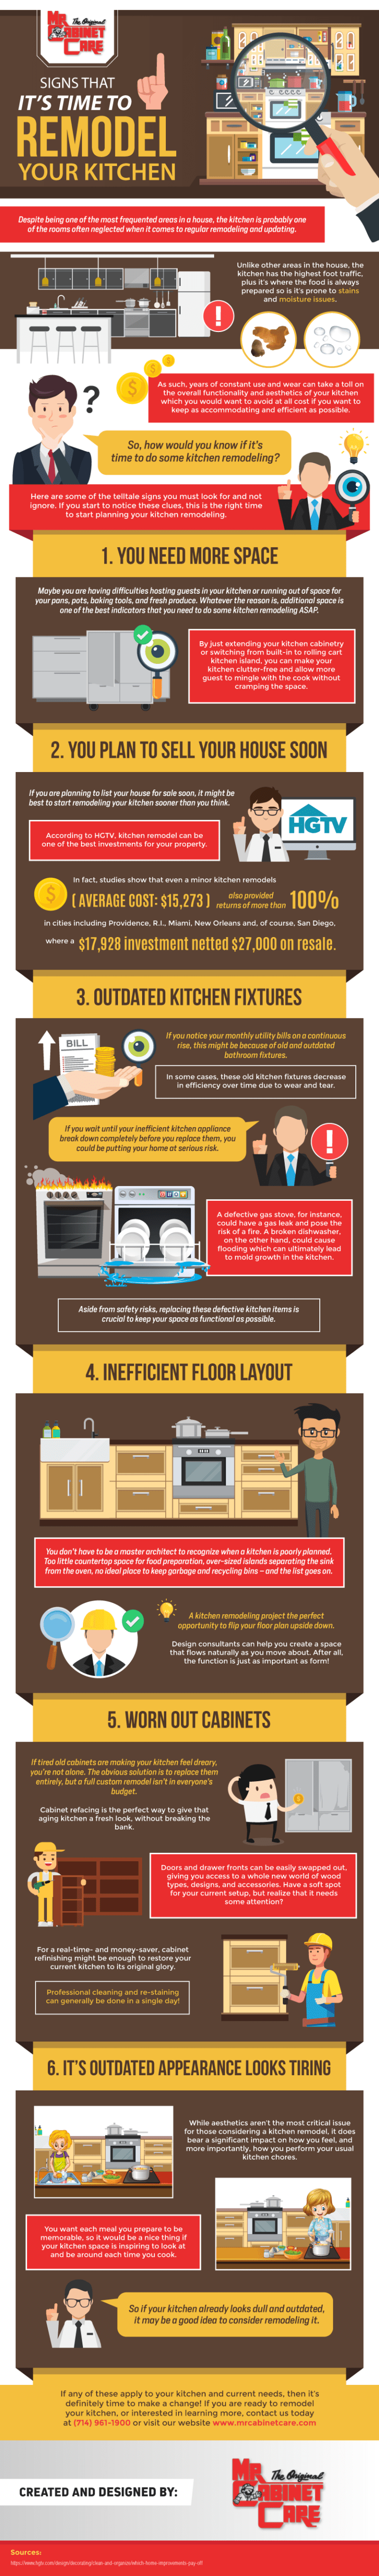 Signs-That-It’s-Time-to-Remodel-Your-Kitchen